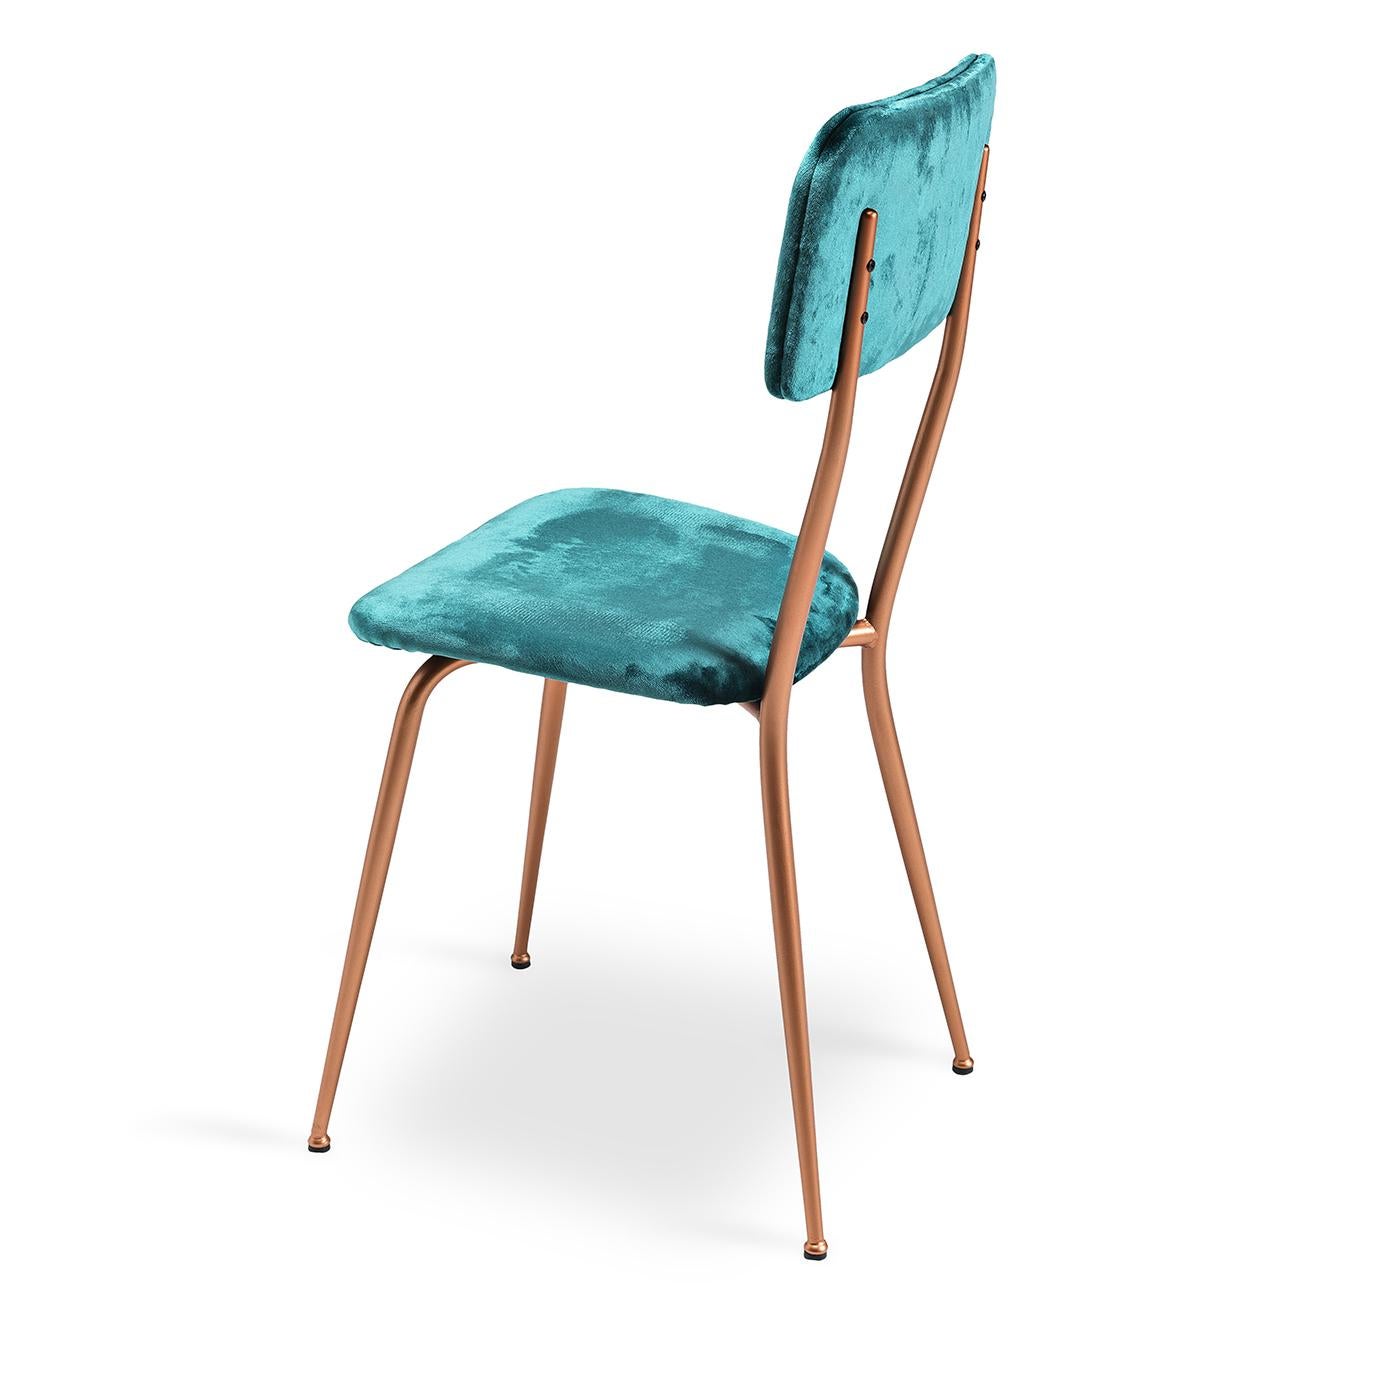 The Miss Ava 4 chair updates a classic silhouette with an ultra-stylish combination of tones and textures. Its understated metal frame boasts a brushed copper finish for a decidedly modern look. Upholstered in luxurious teal velvet, this chair's